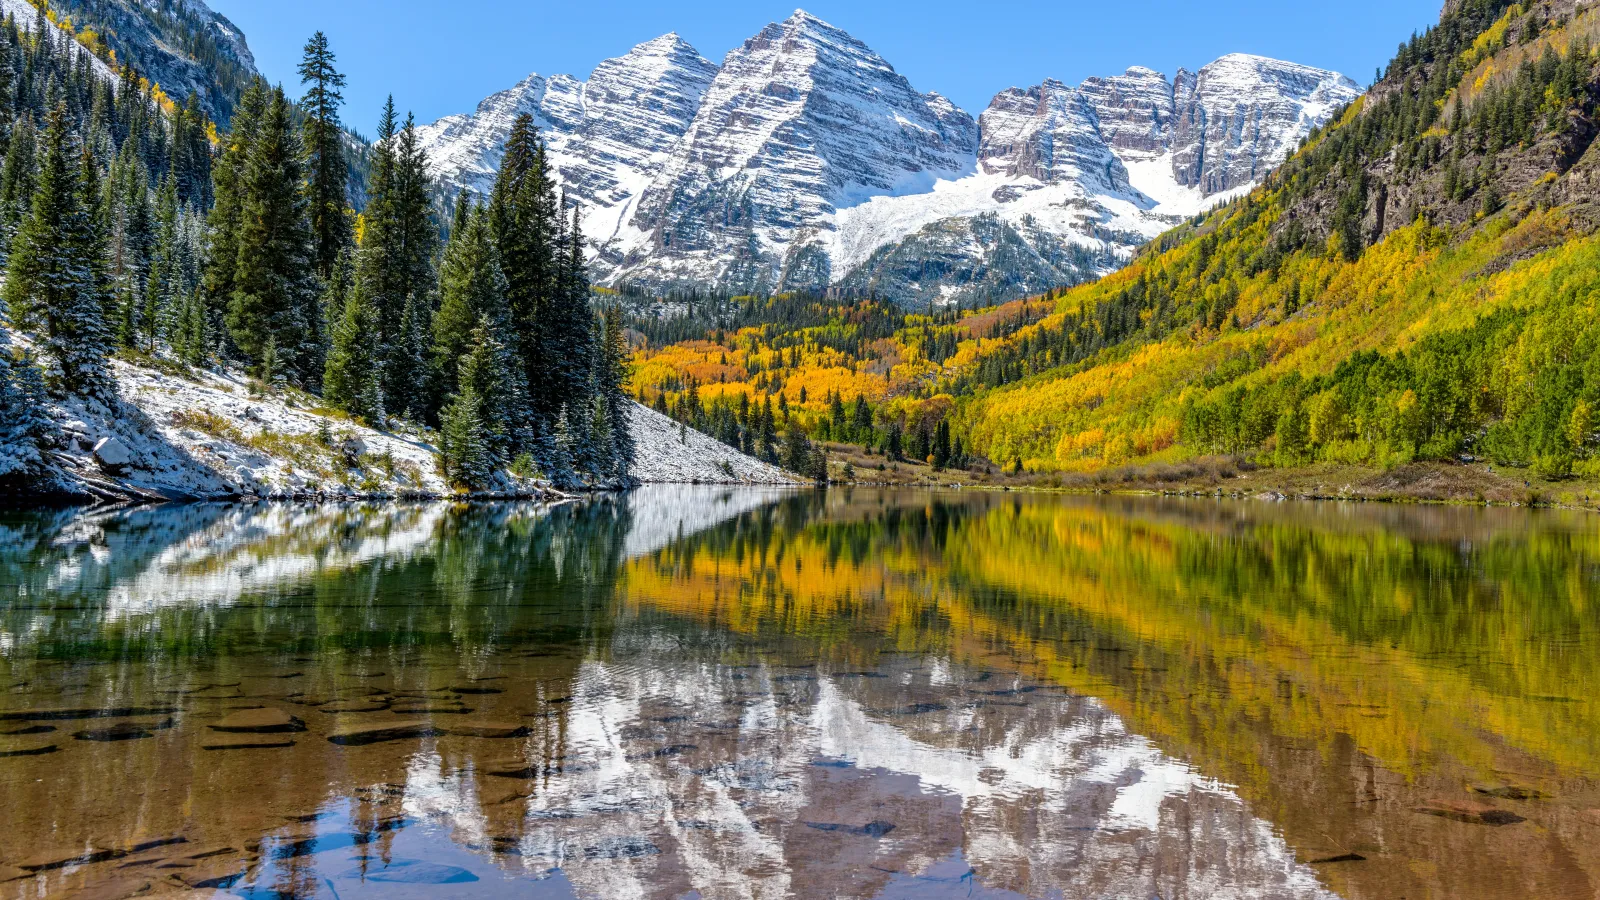 Maroon Bells surrounded by mountains and trees in Colorado